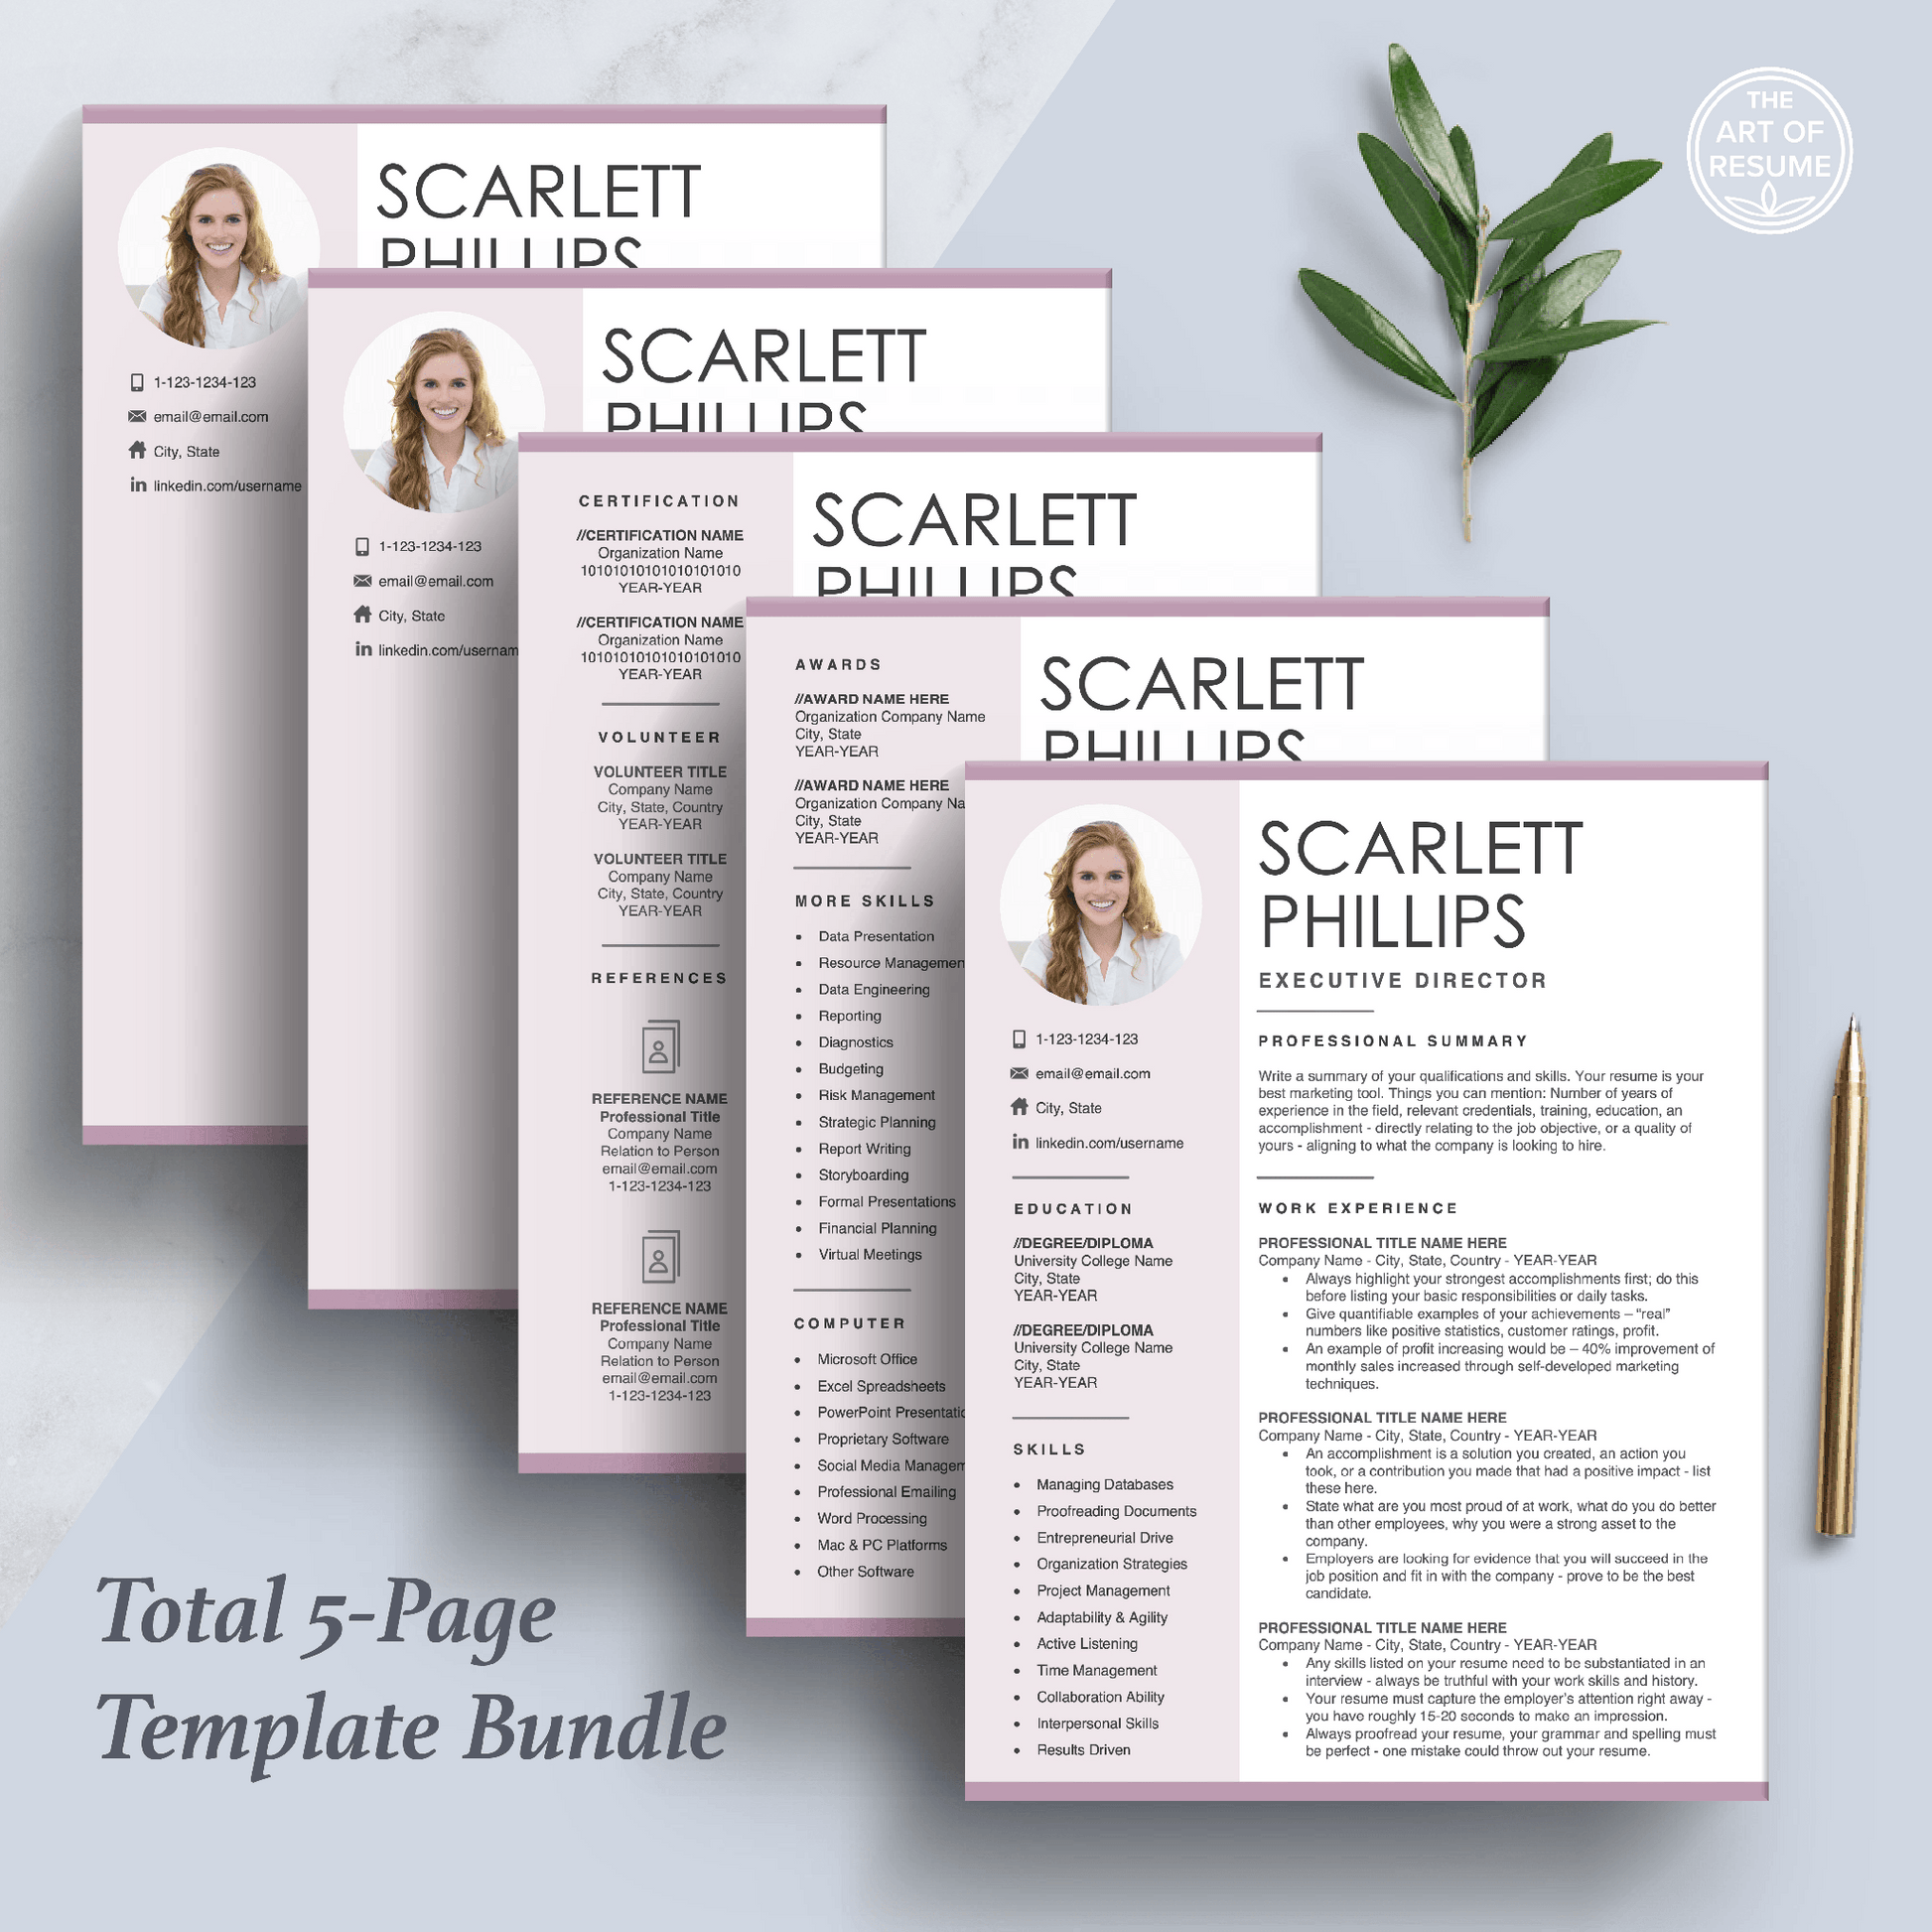 The Art of Resume Templates | Executive C Suite Level Resume CV Design Bundle including matching cover letter and reference page